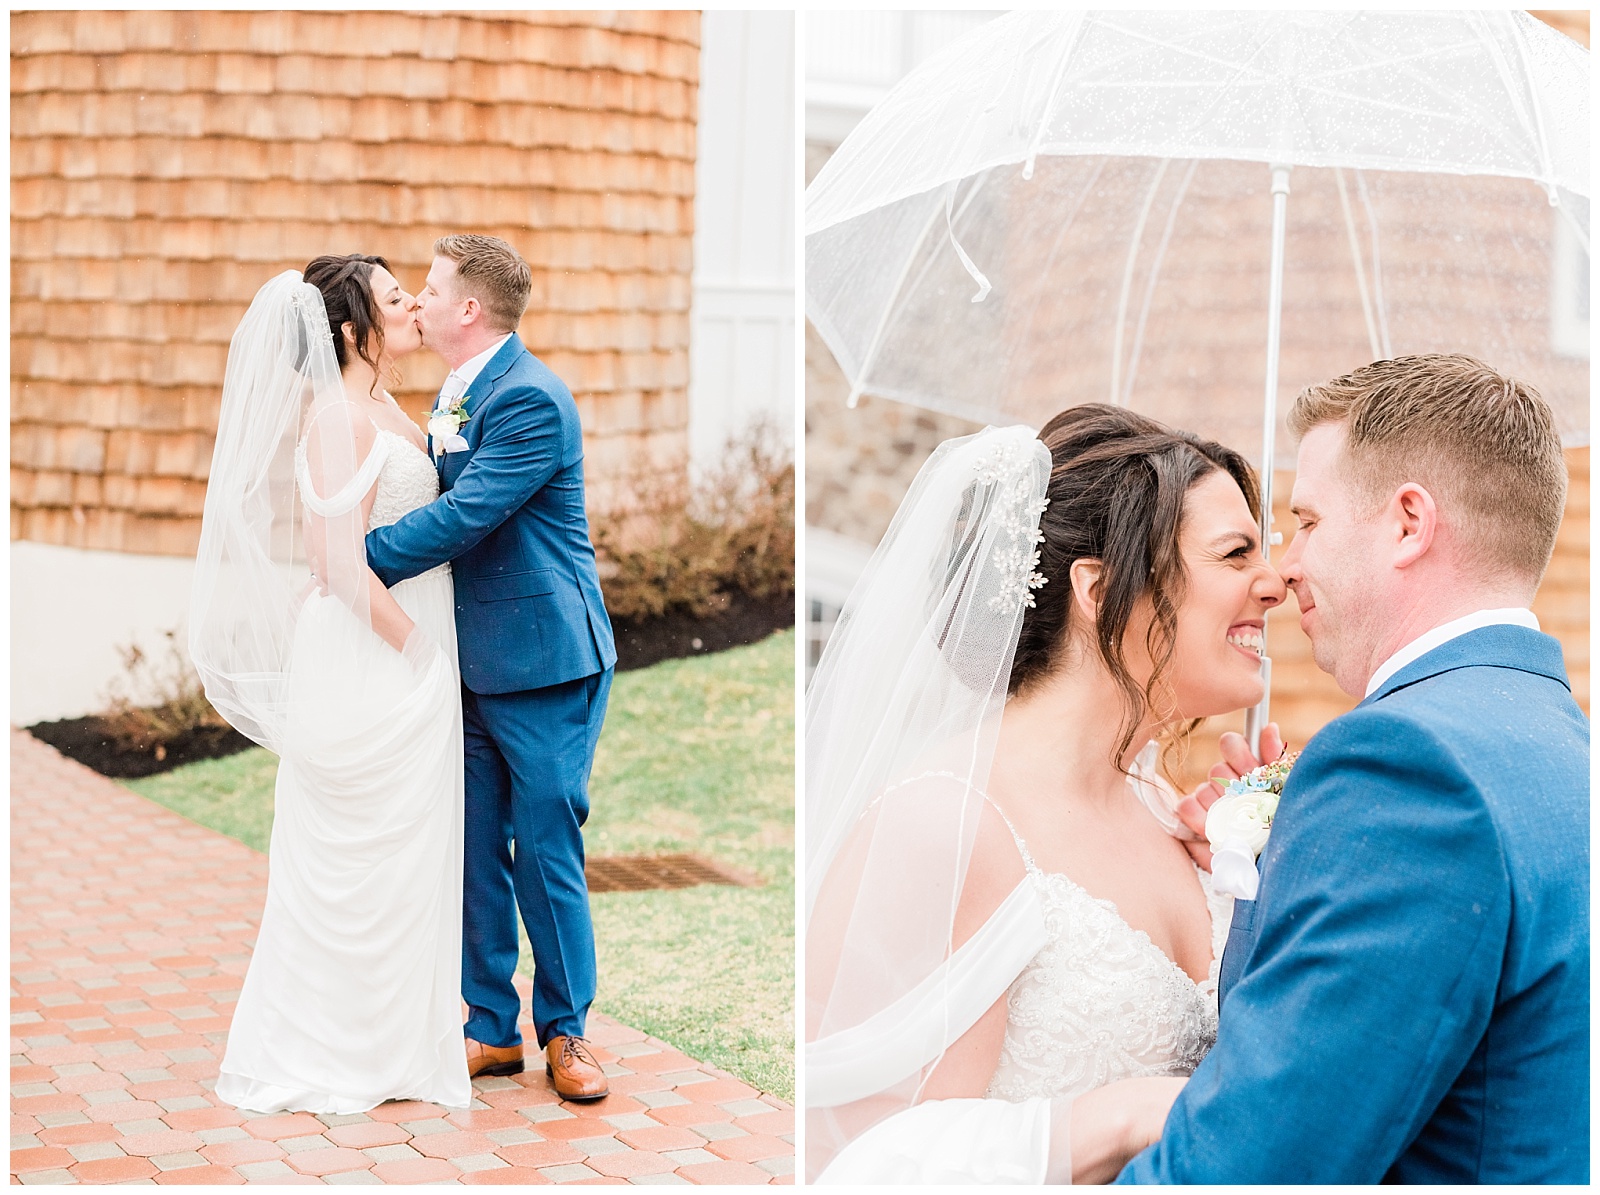 Bride and groom kiss in the rain at the Ryland Inn.